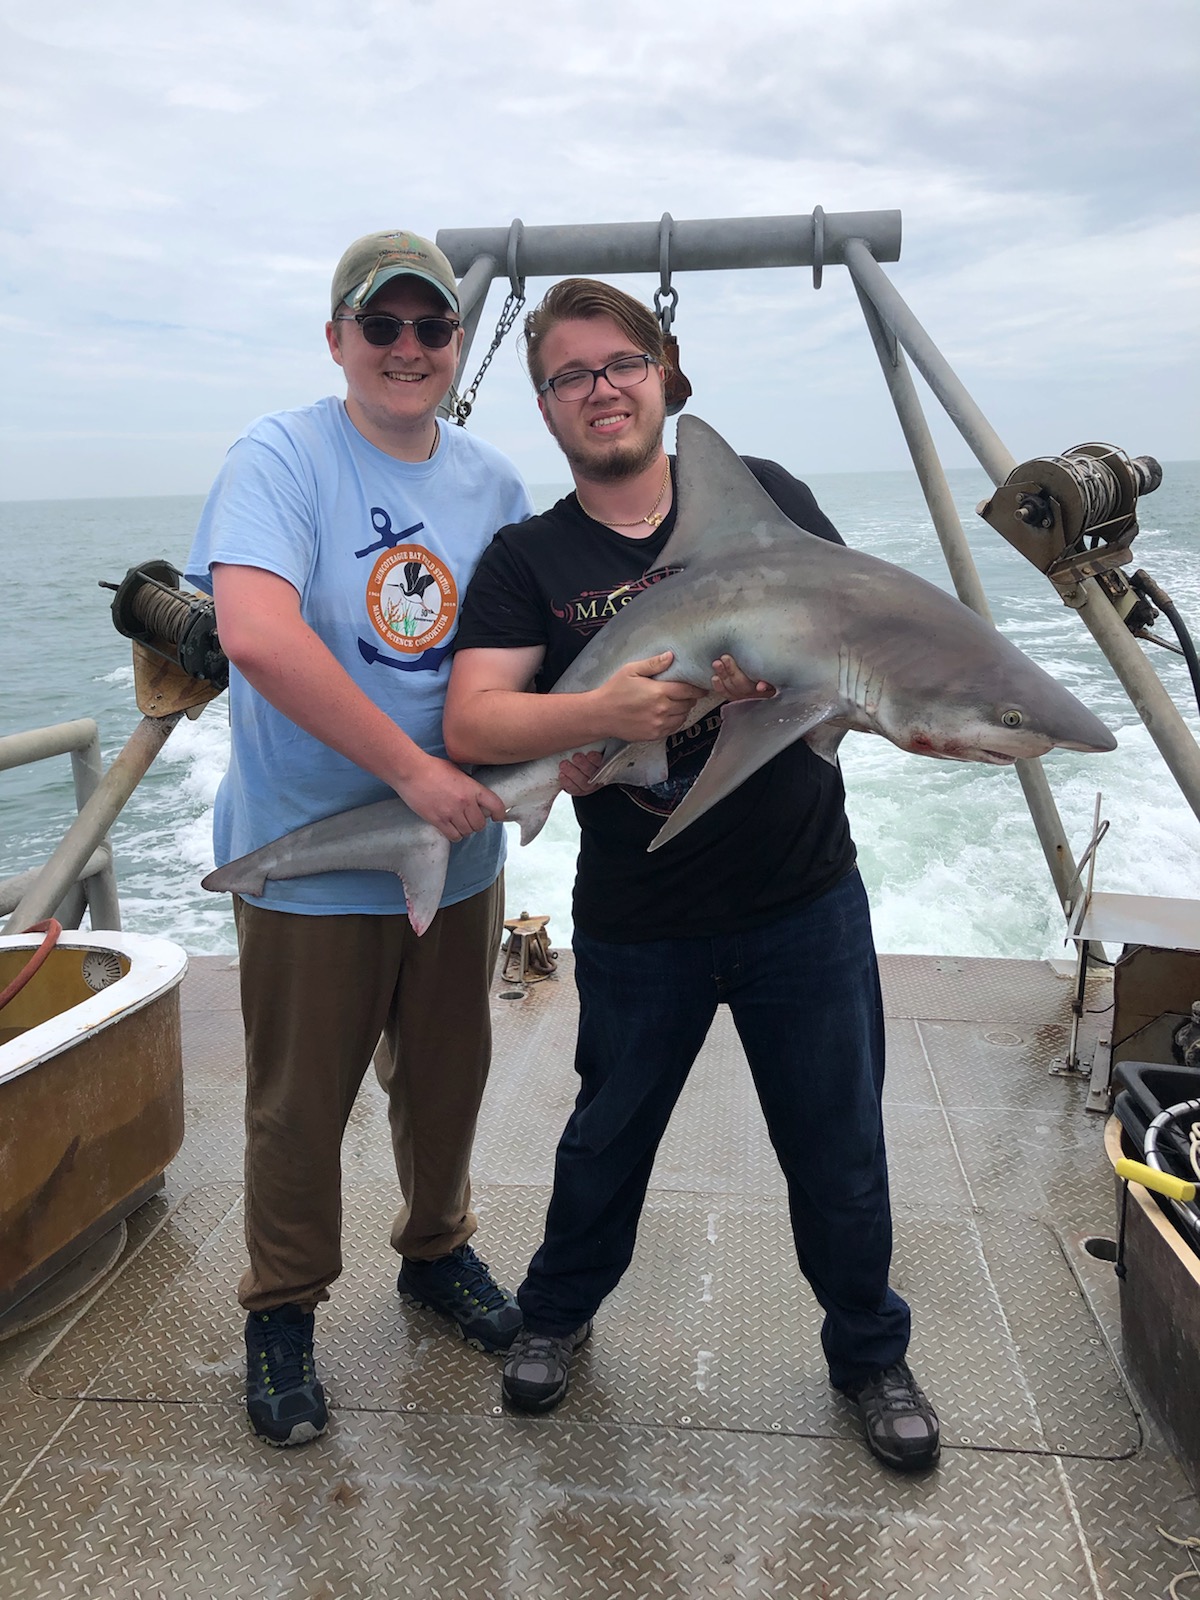 Two KU Students holding a shark on the deck of a boat